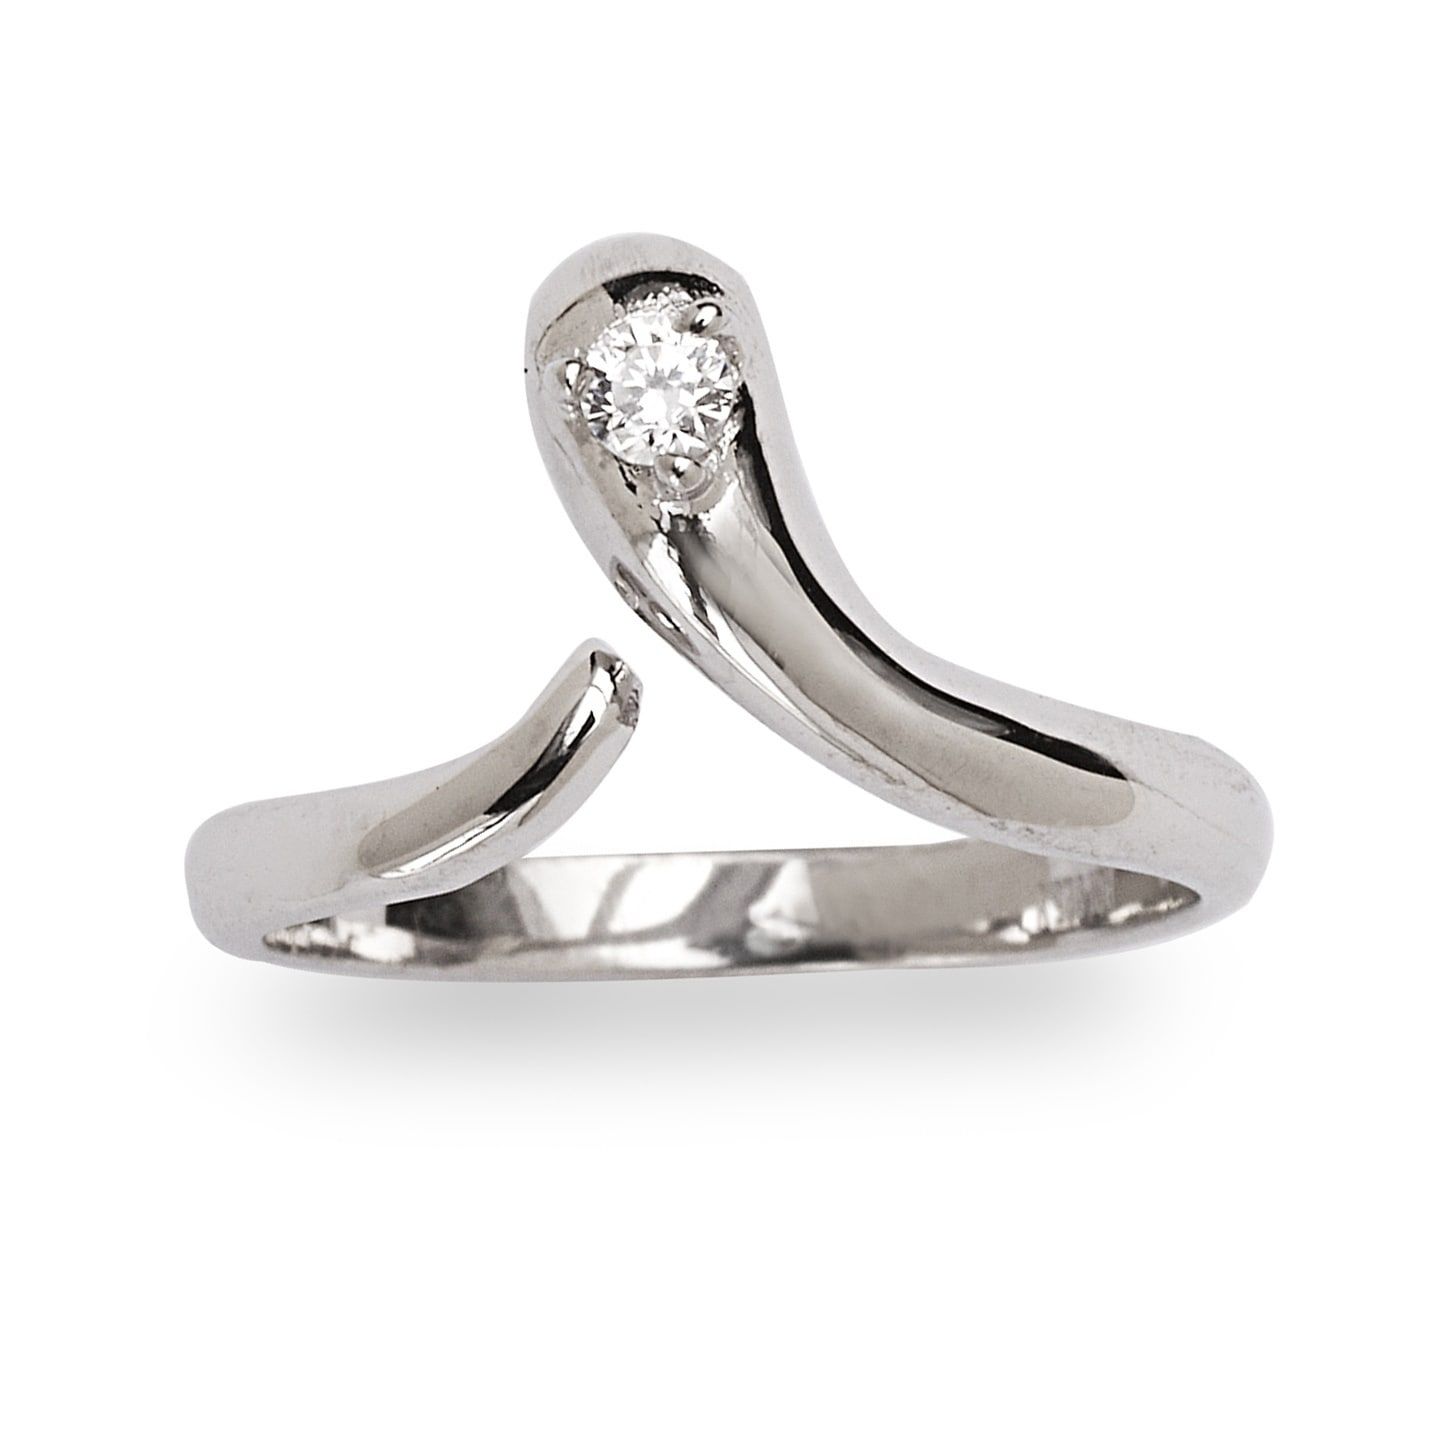 Sterling Silver Toe Rings For Less | Overstock With Regard To Most Up To Date Non Adjustable Sterling Silver Toe Rings (View 7 of 15)